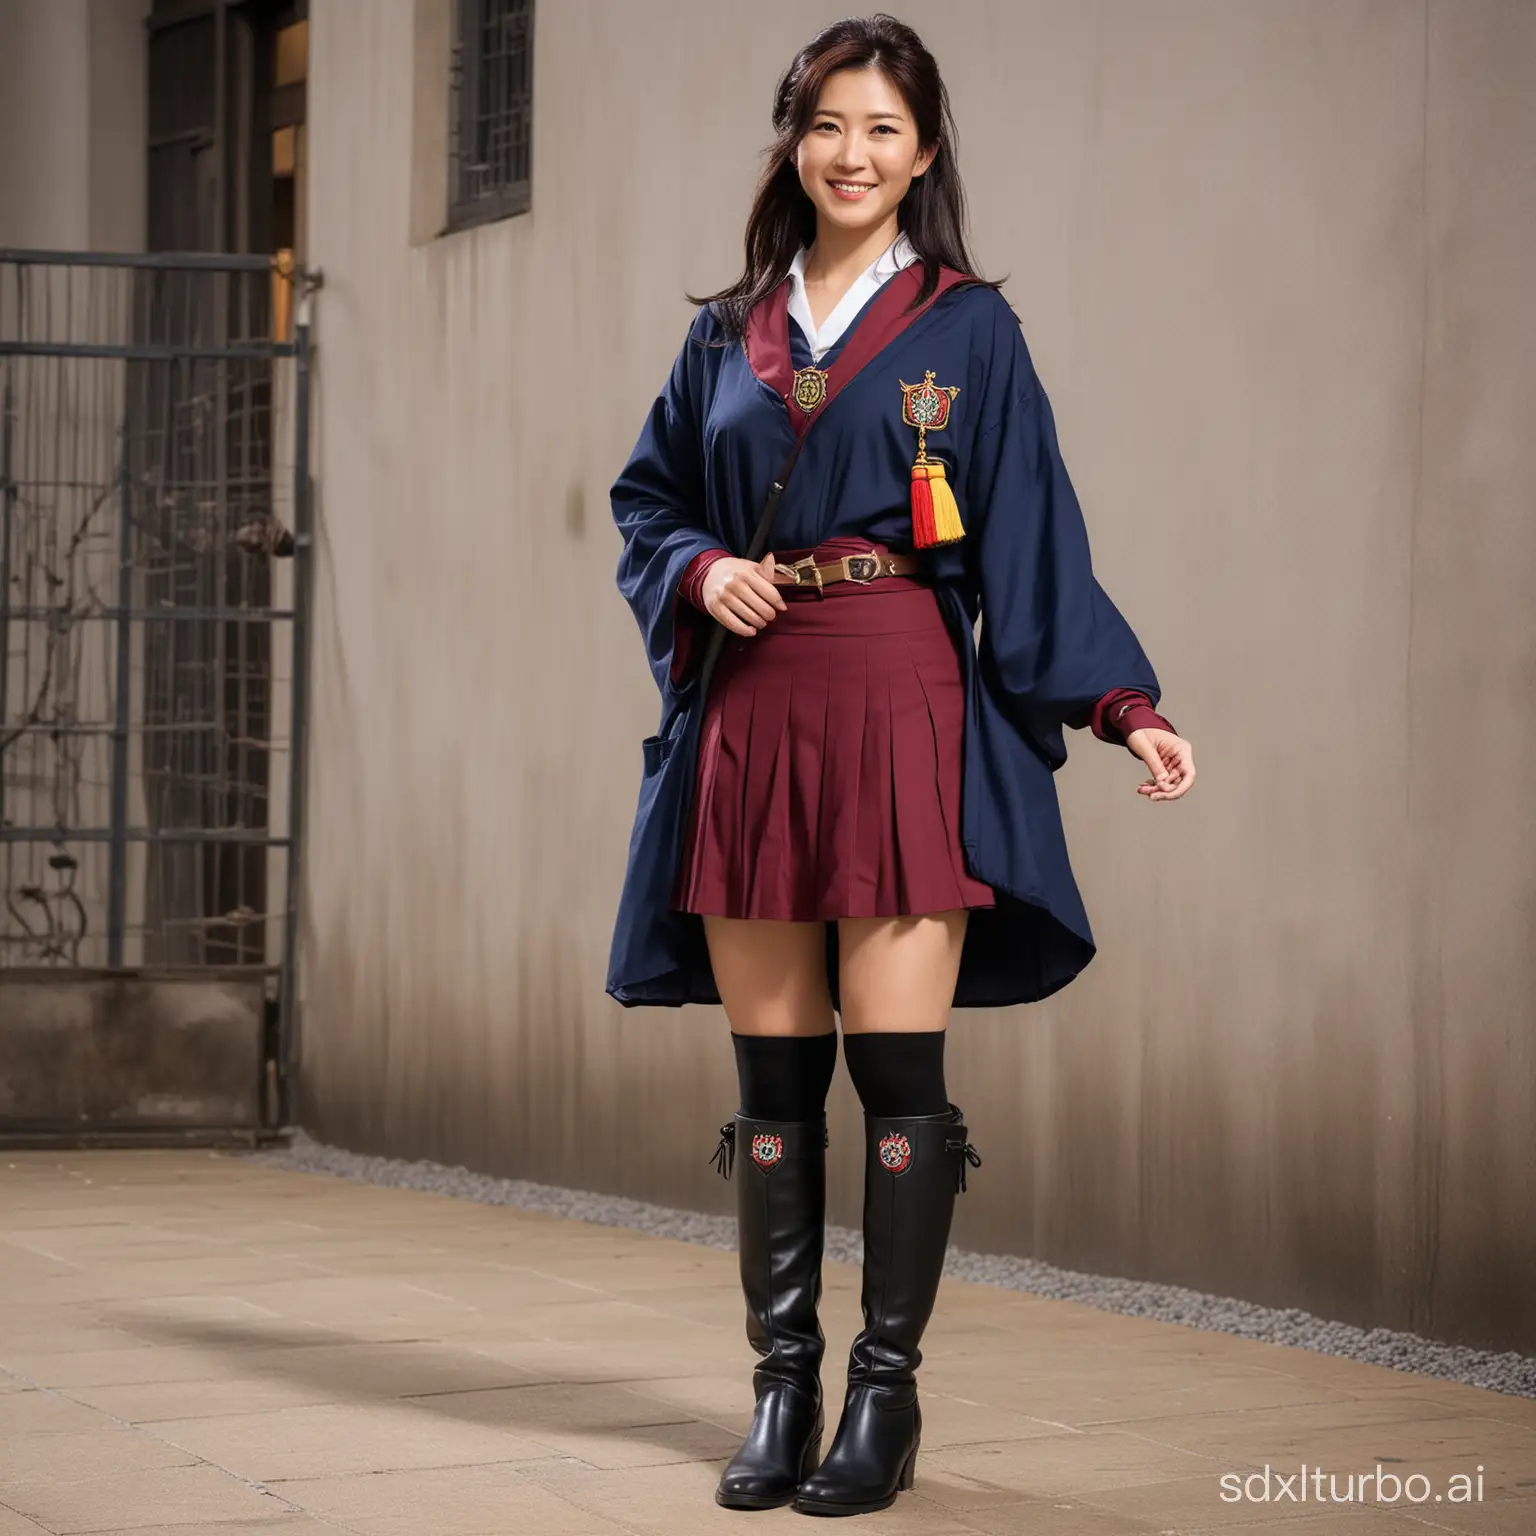 Japanese-Woman-in-Hogwarts-Inspired-Attire-Smiling